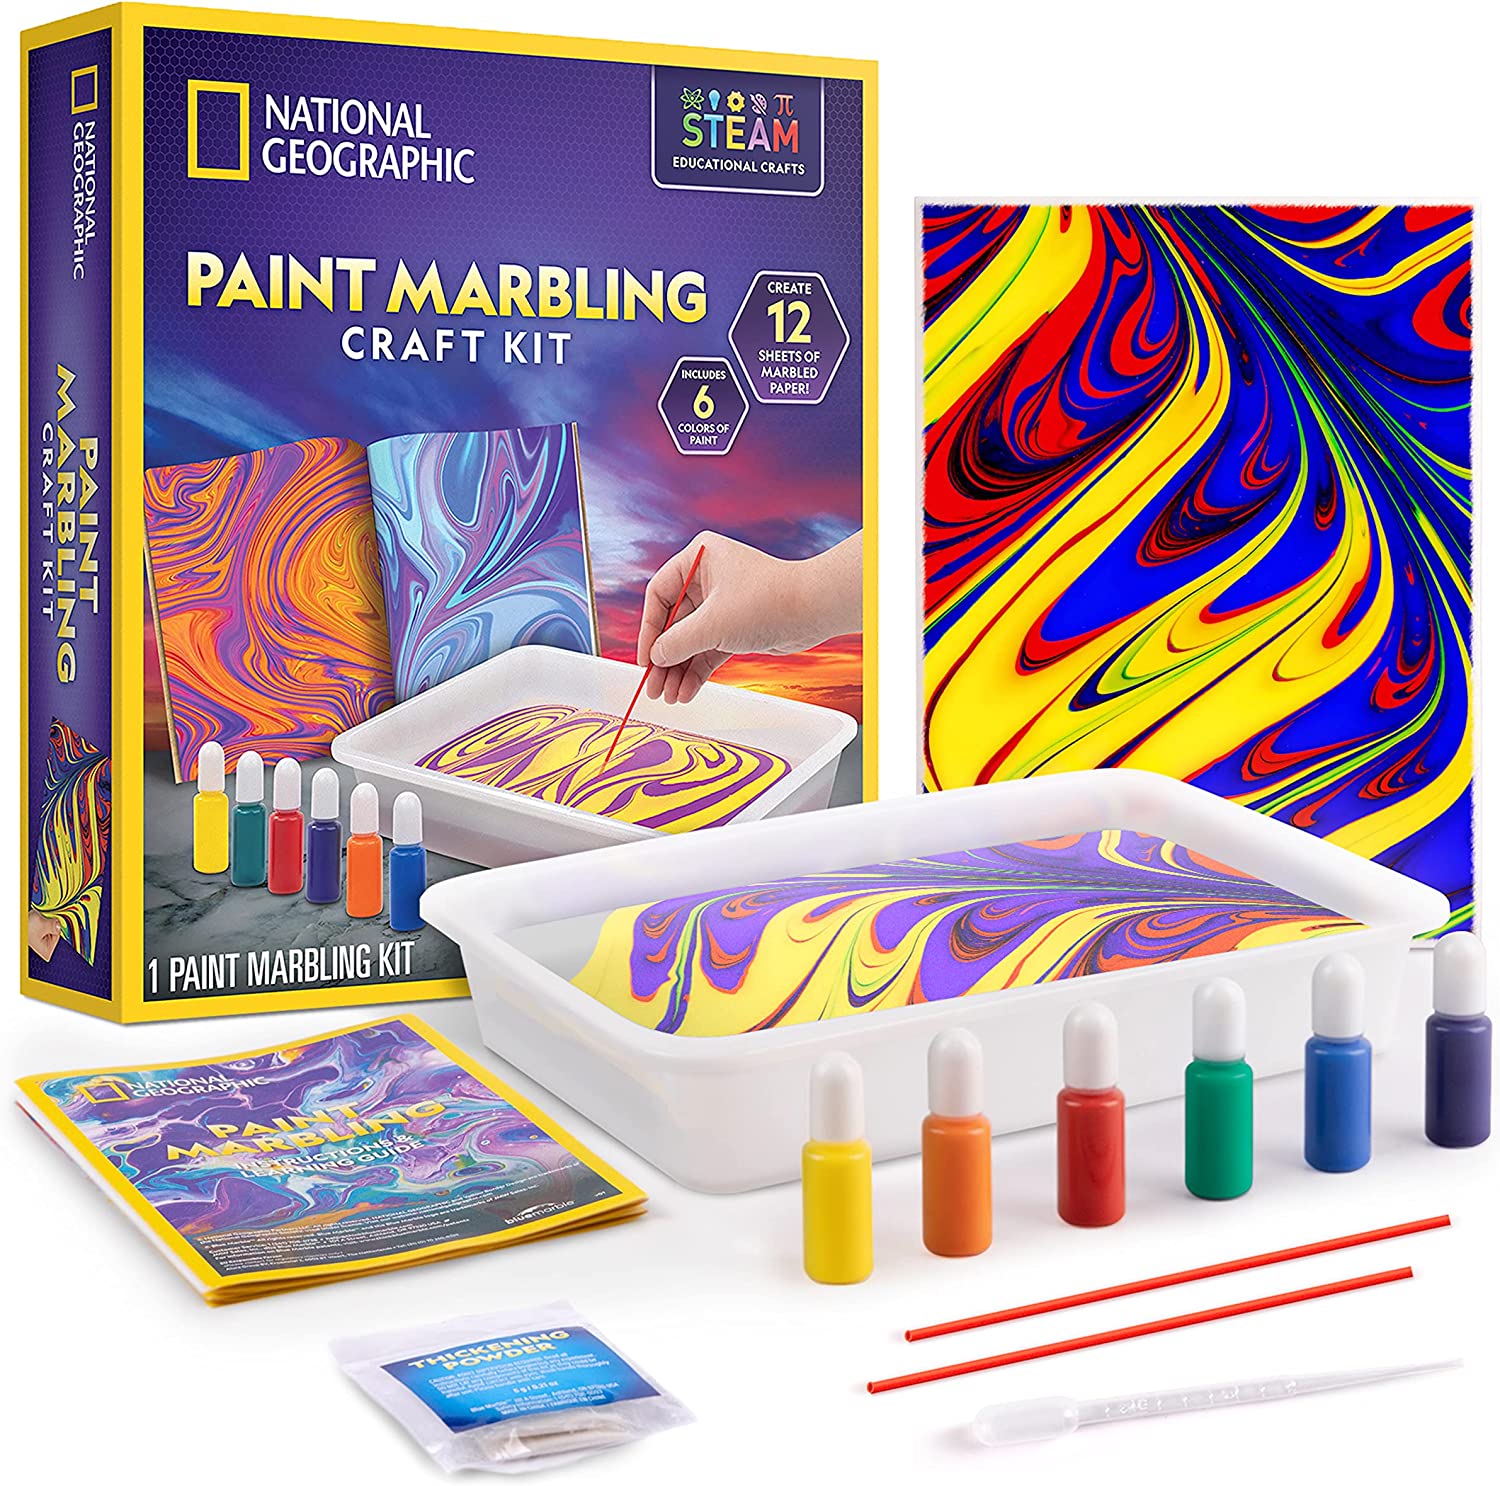 NATIONAL GEOGRAPHIC Paint Marbling Arts & Crafts Kit